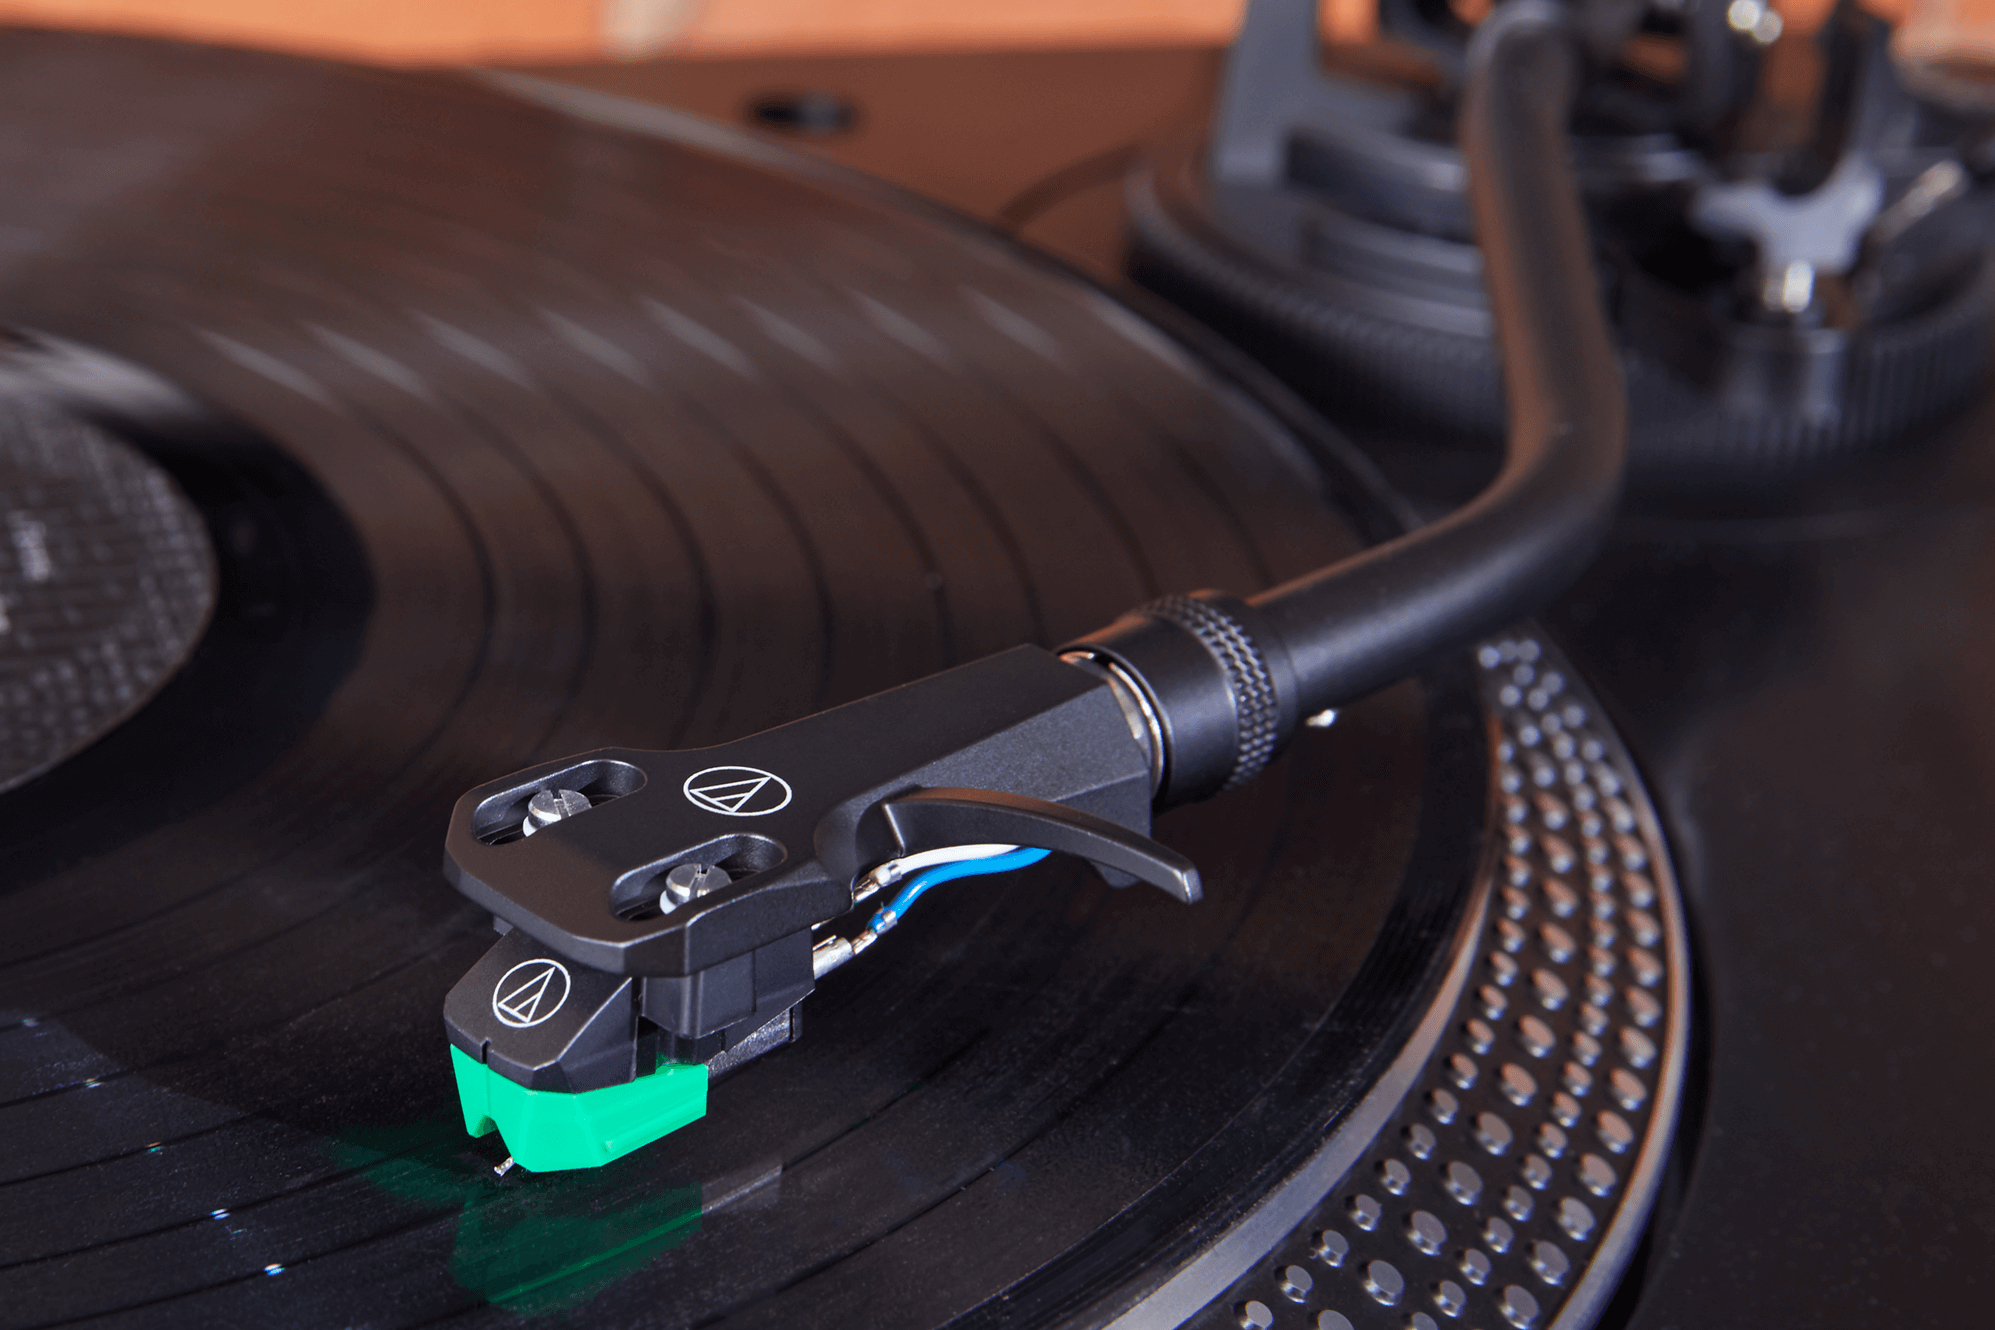 Audio technica lp60xbt • Compare & see prices now »